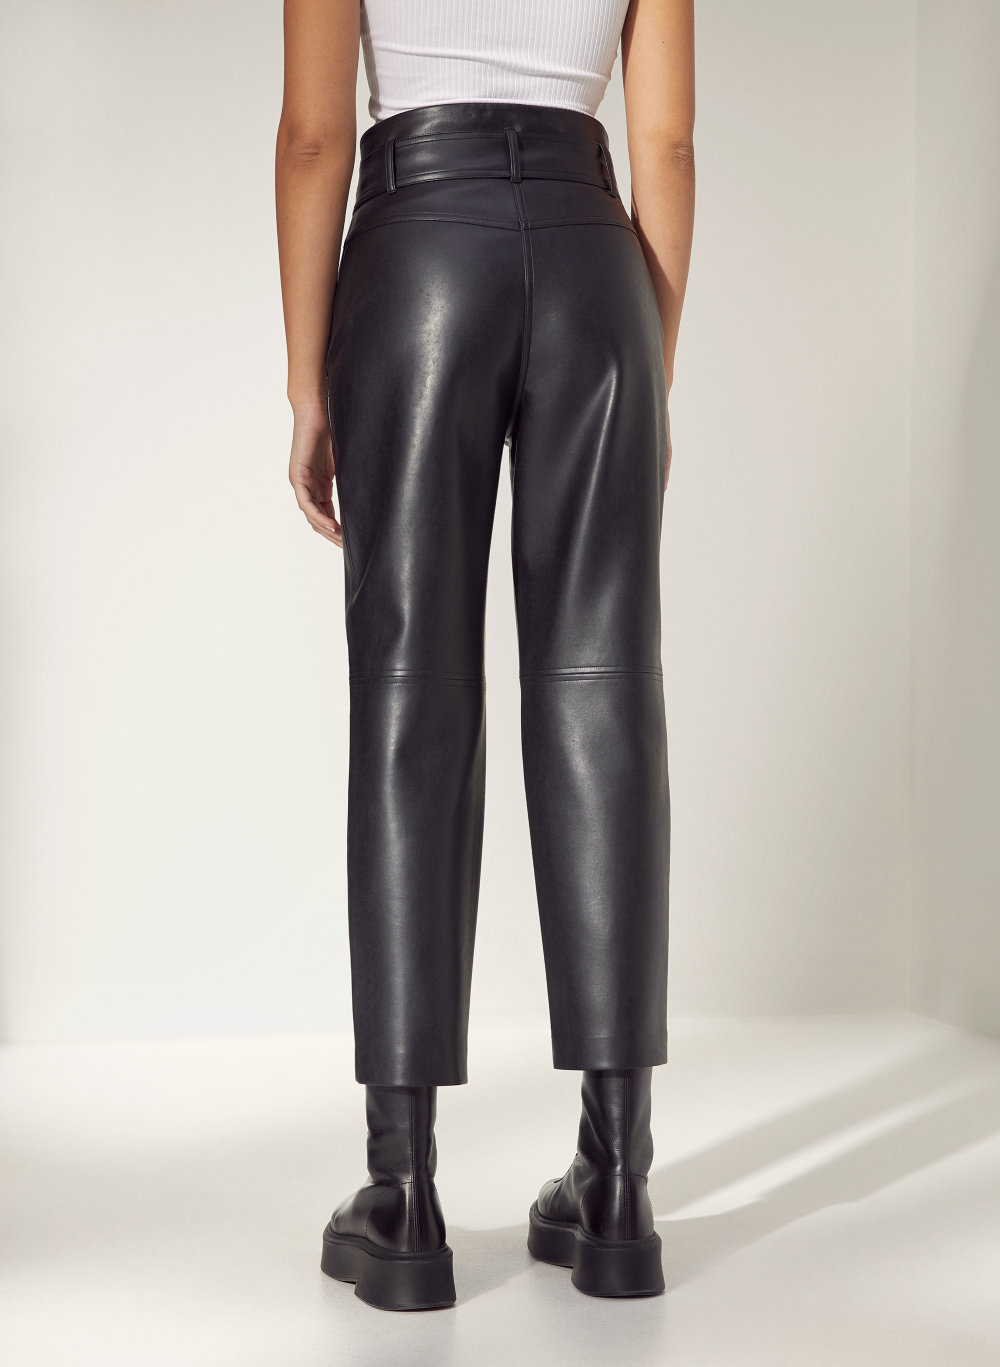 tight leather pants with a zip front to back